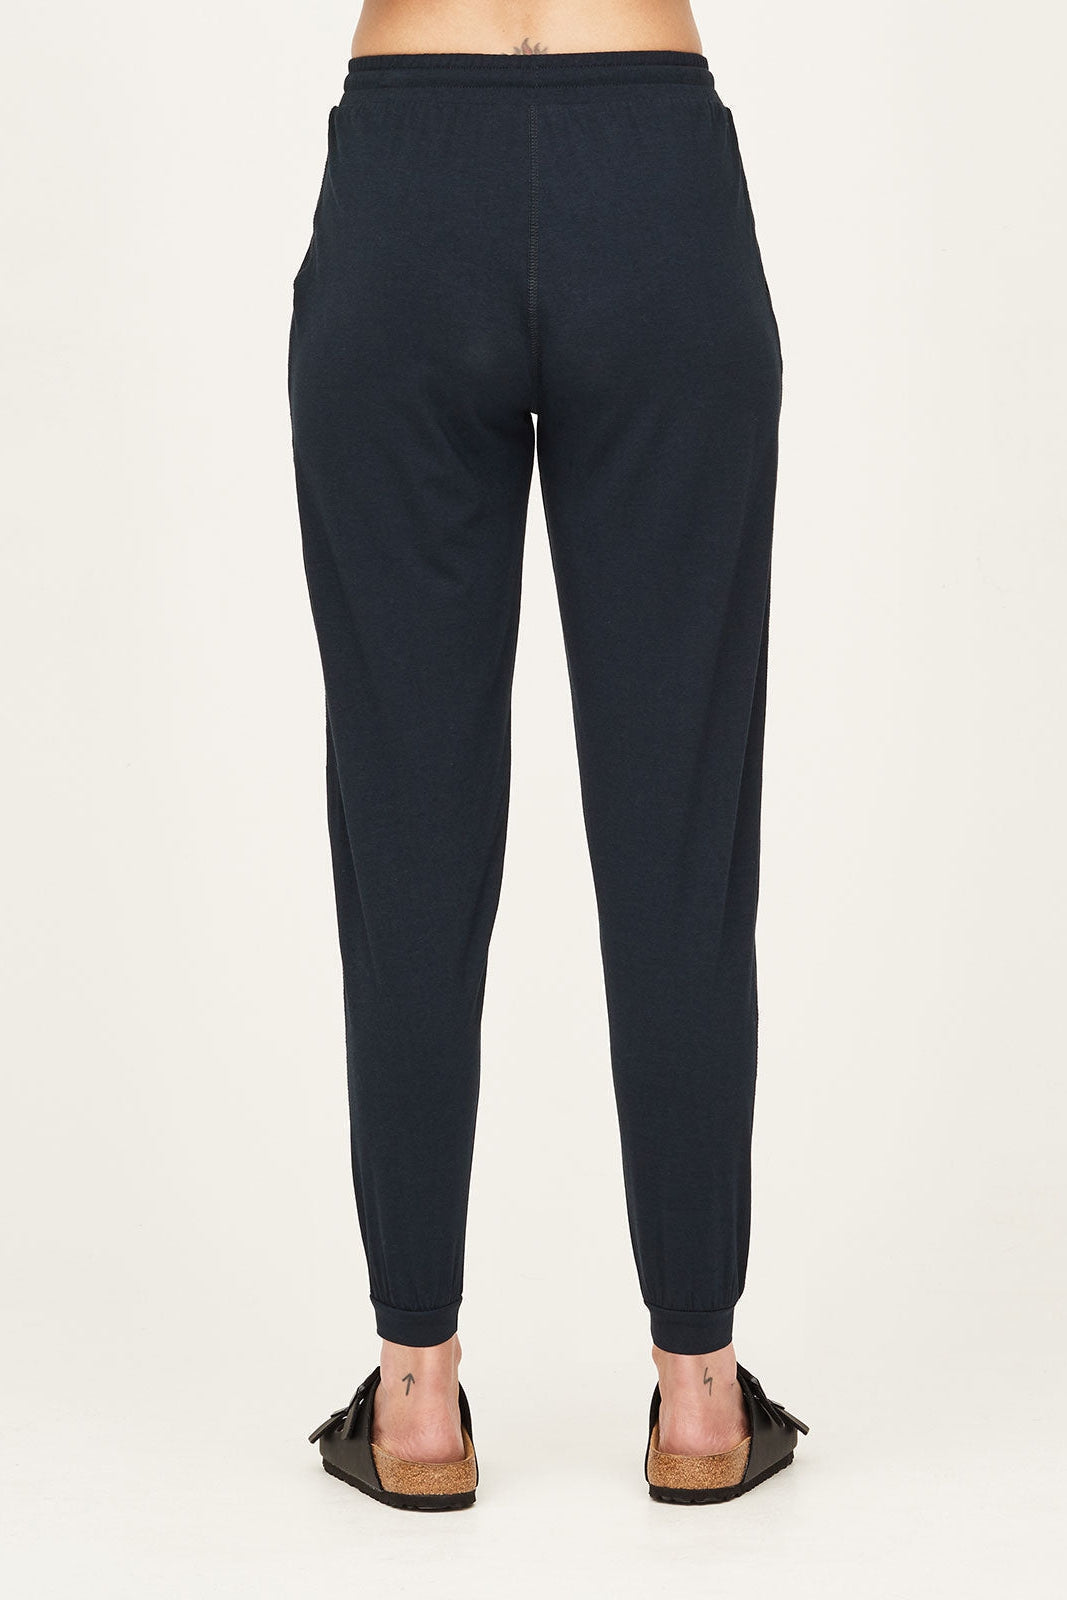 Thought Emerson Slacks in Navy-Womens-Ohh! By Gum - Shop Sustainable